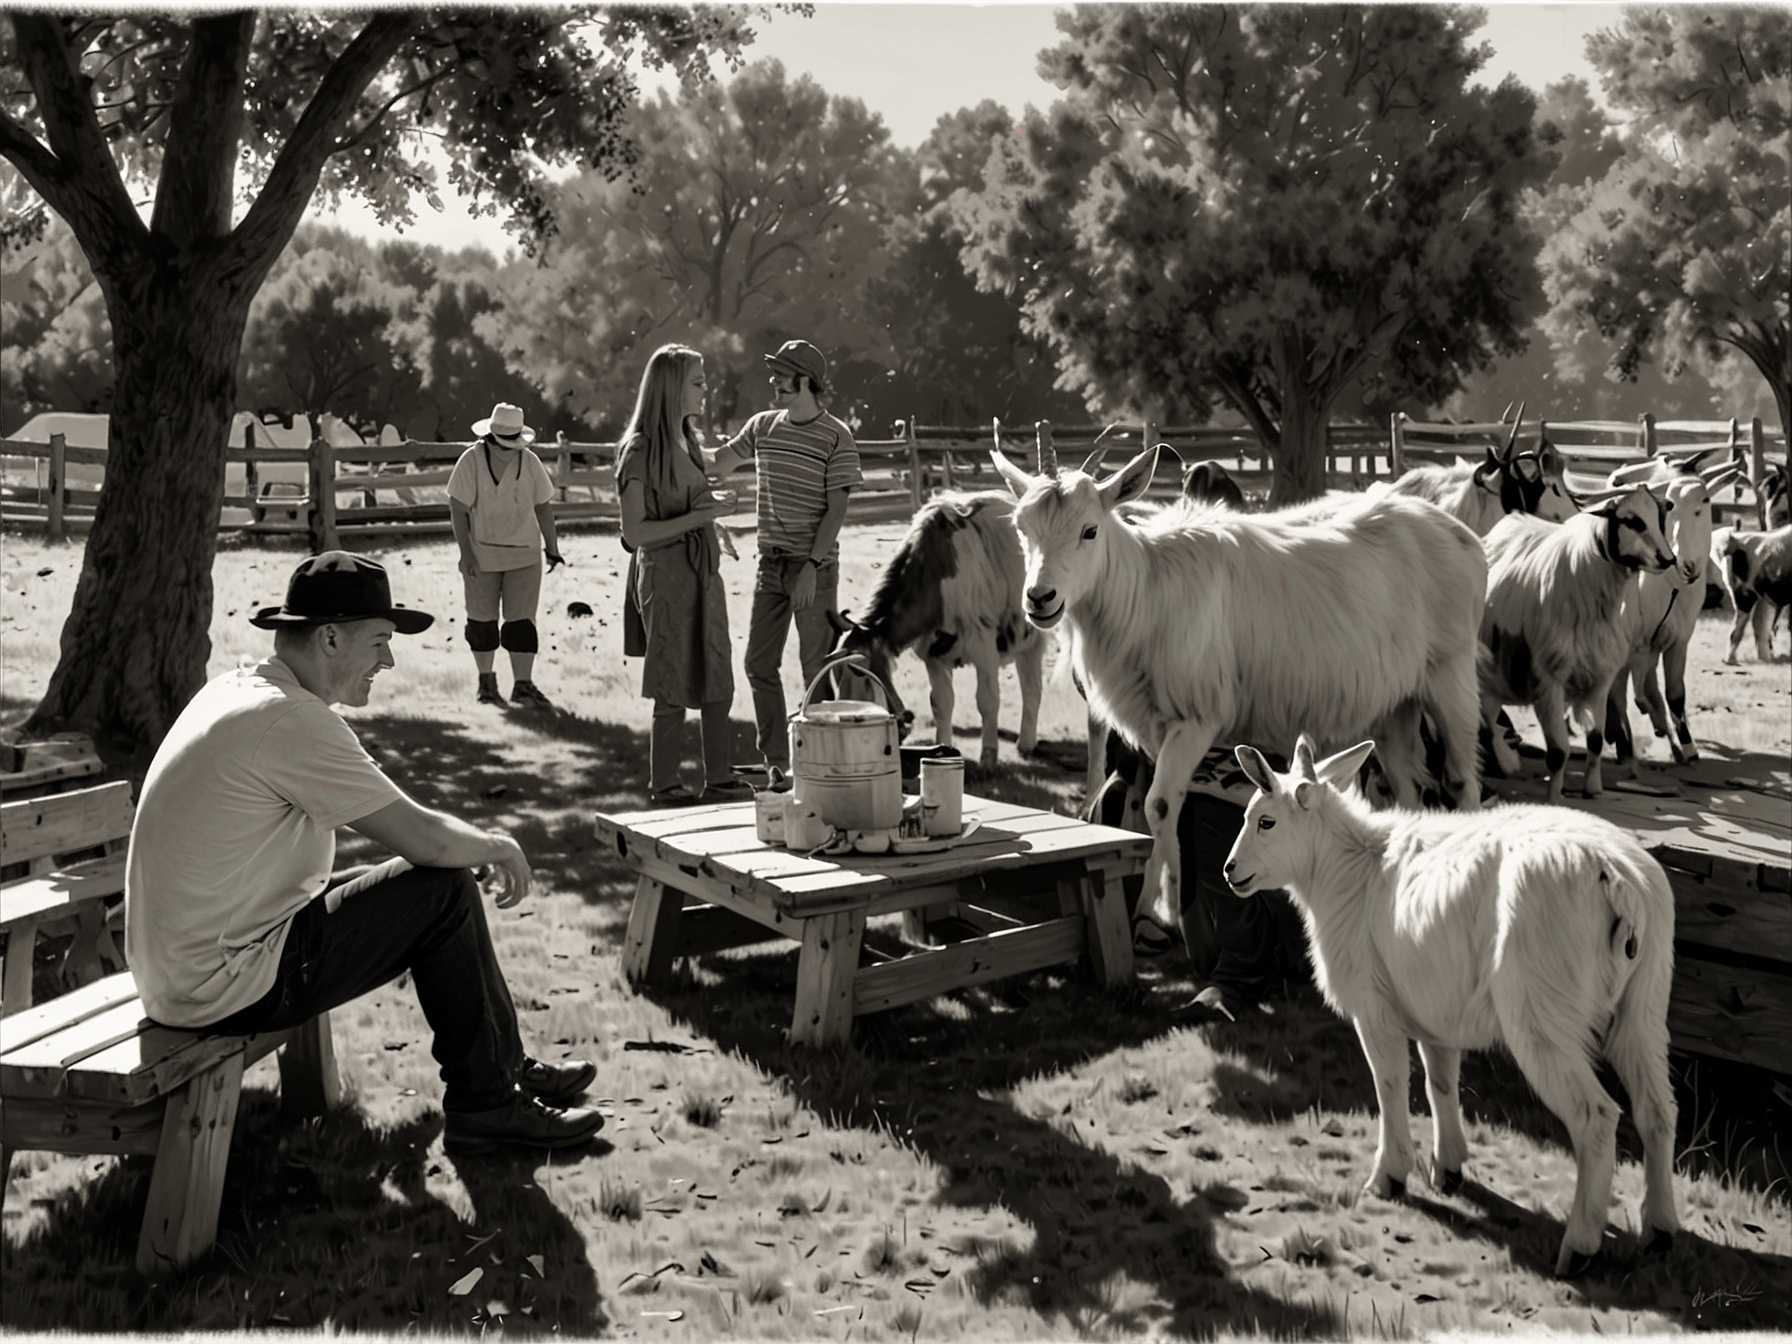 Visitors enjoy a sunny day and delicious food amidst the company of friendly goats during the Picnic with Goats event at Cajun Corral Farm.